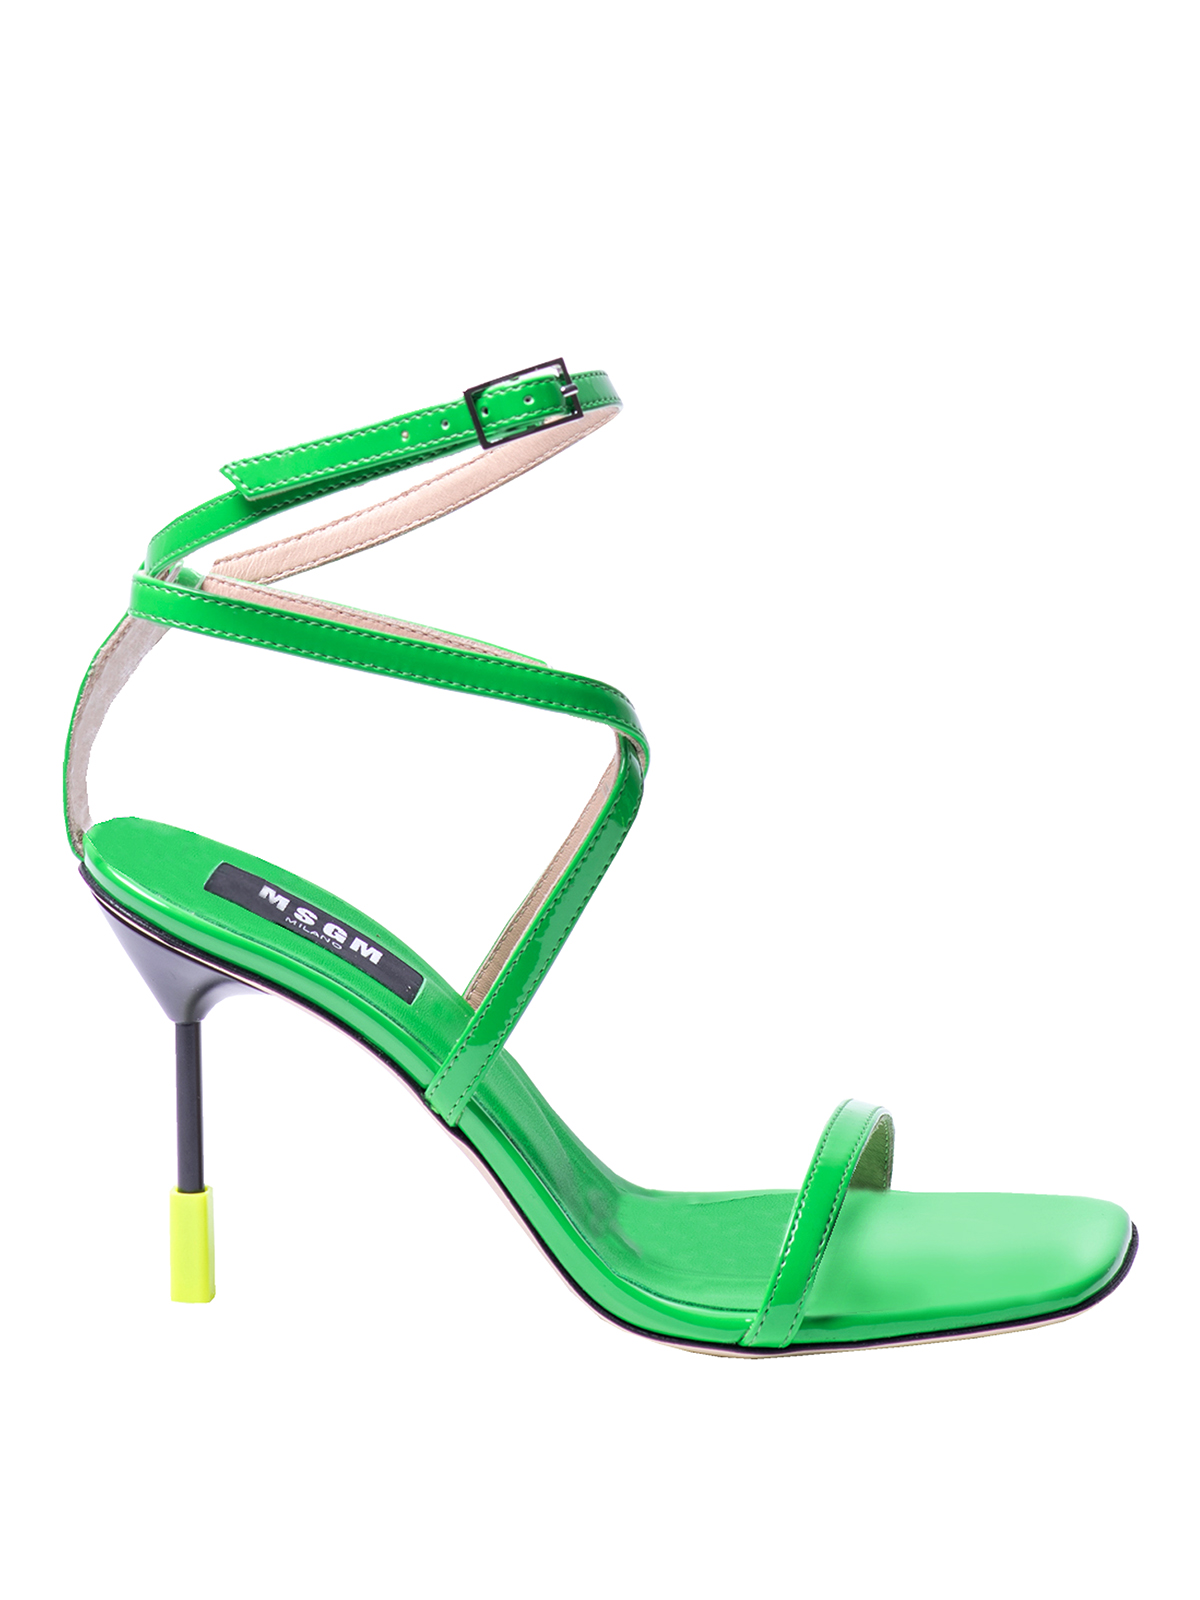 Msgm Patent 100mm Cross-strap Sandals In Green